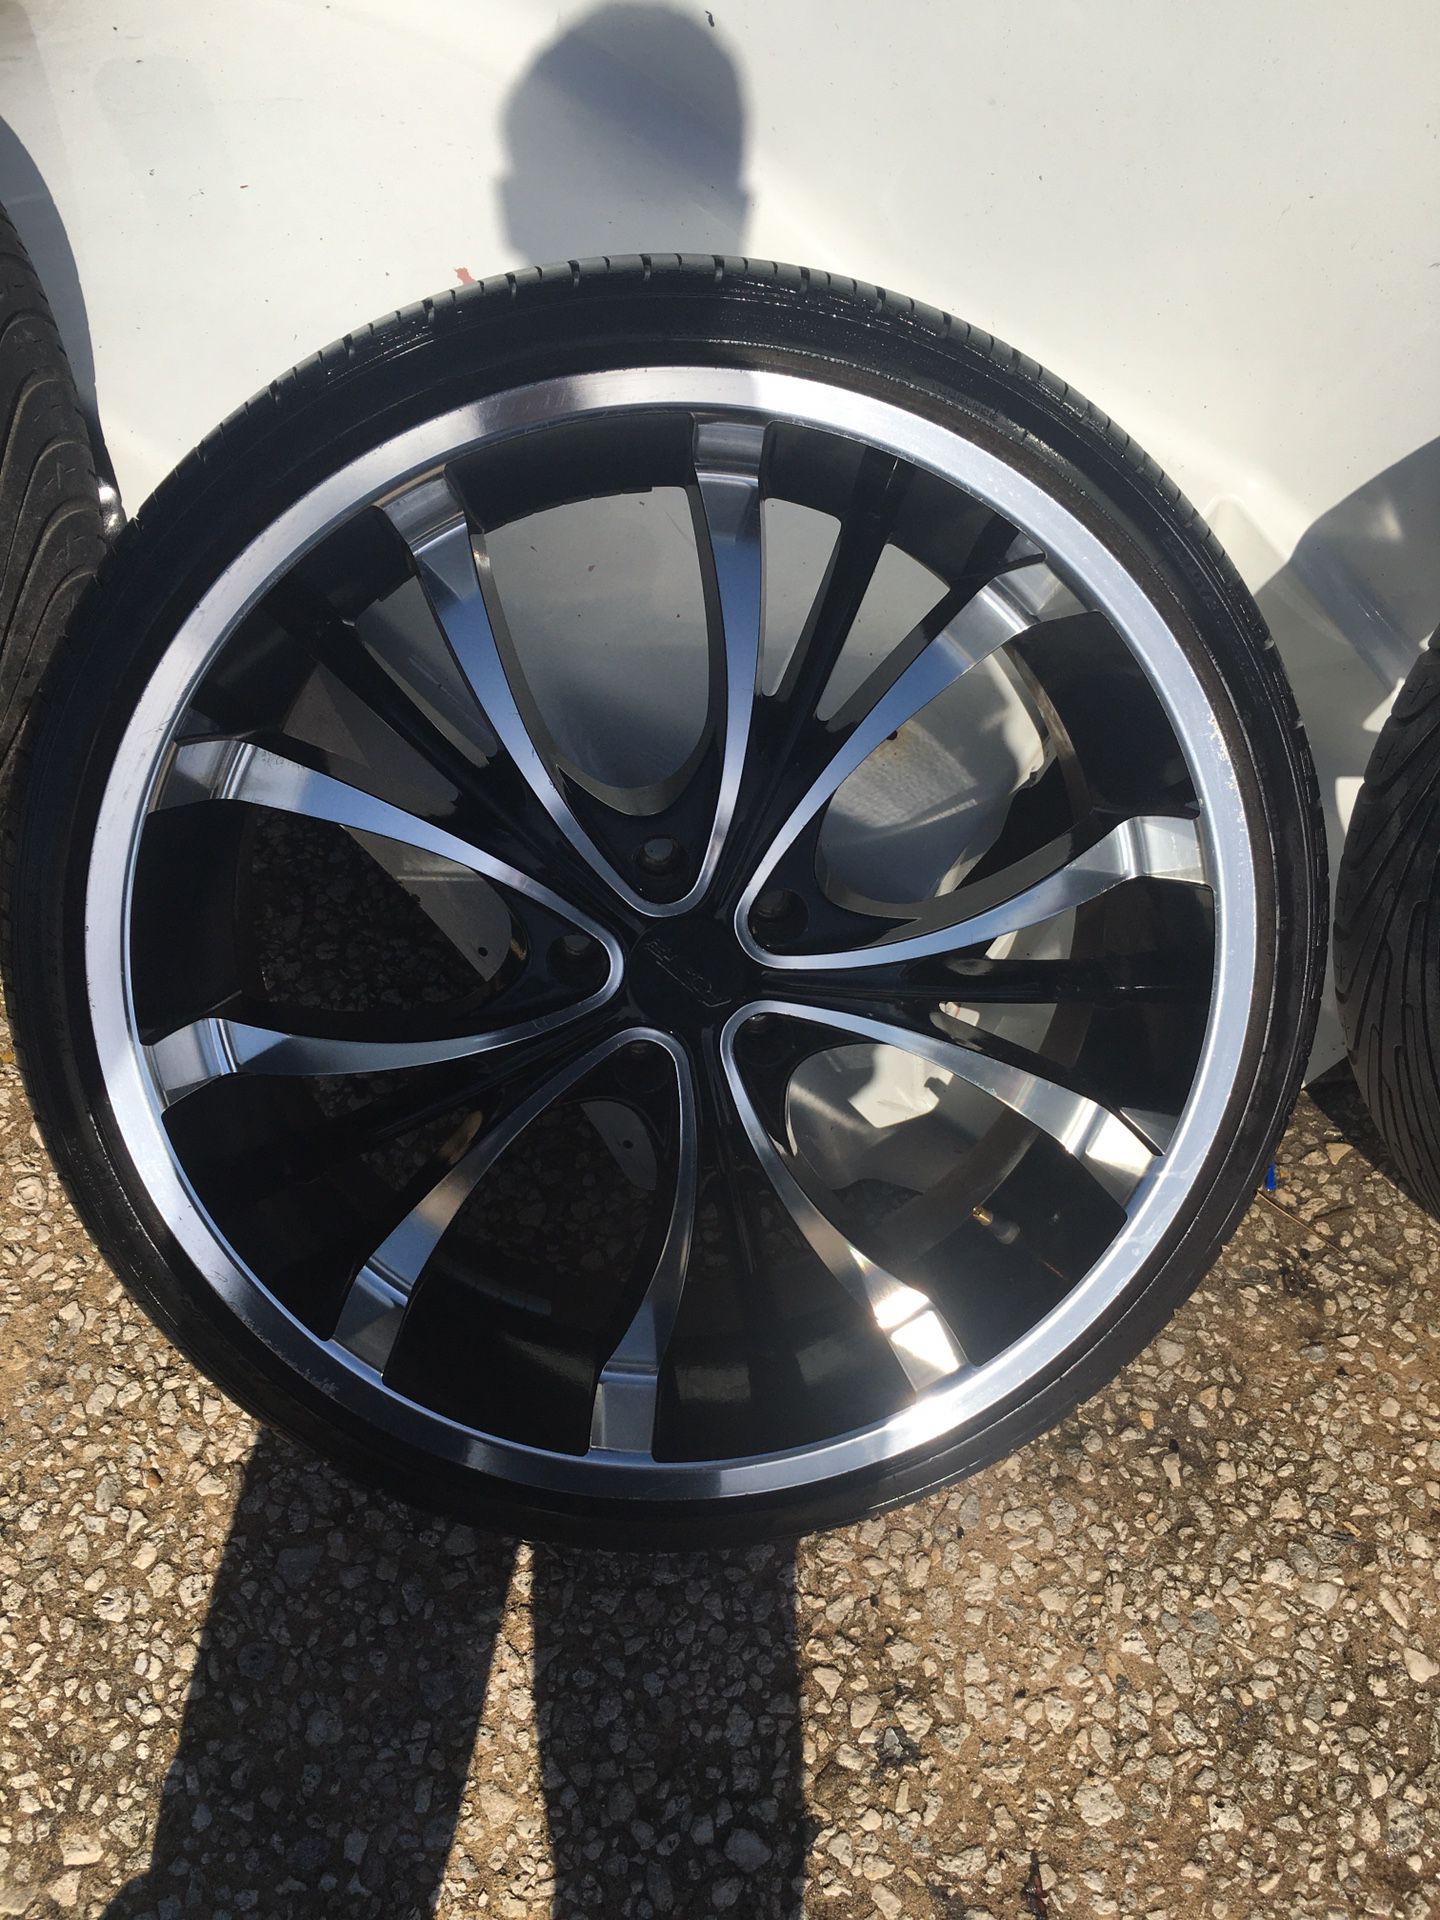 22s took off a GM let me know ASAP